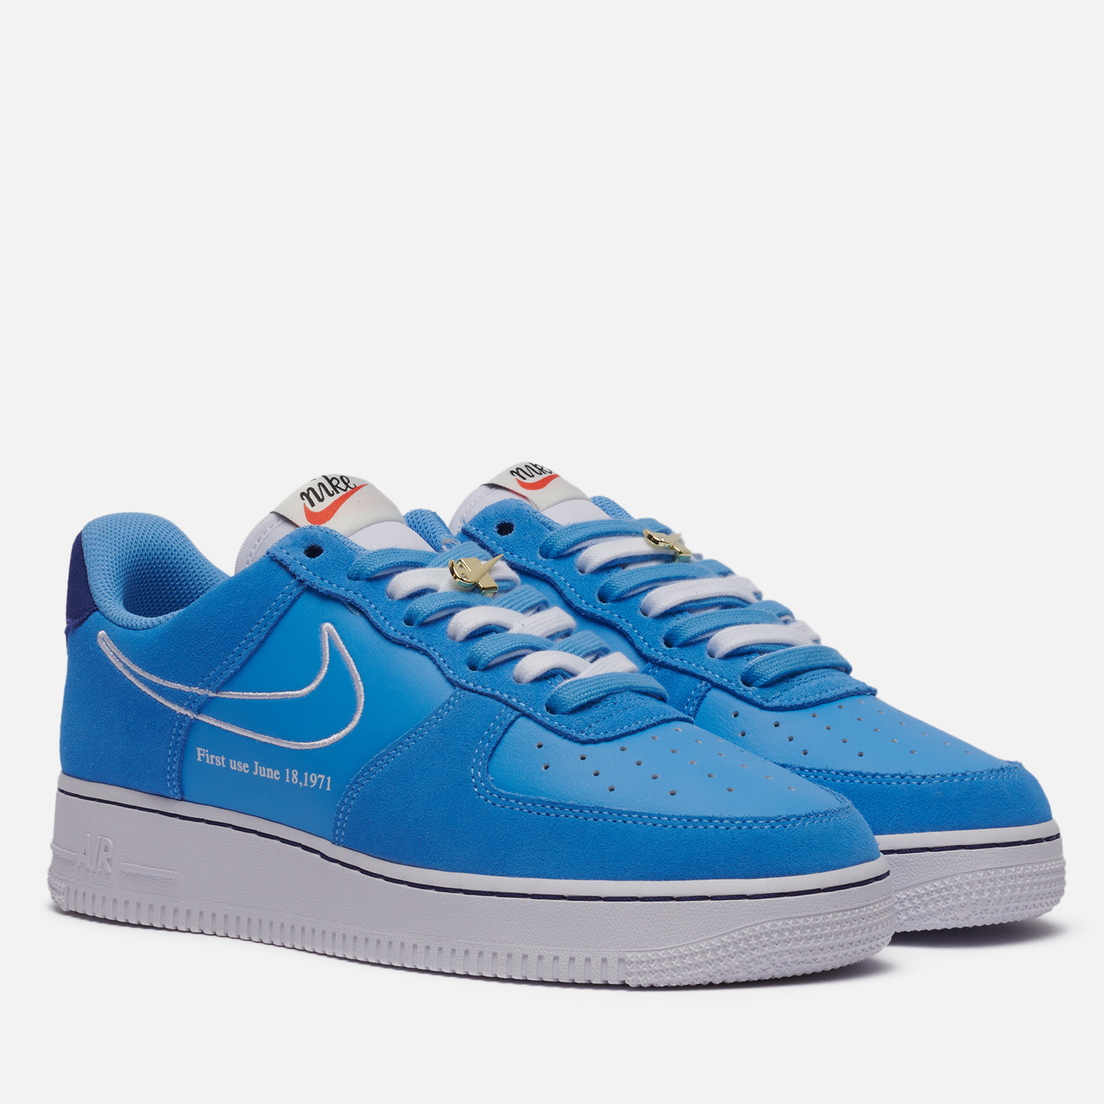 Nike Мужские кроссовки Air Force 1 07 Low First Use